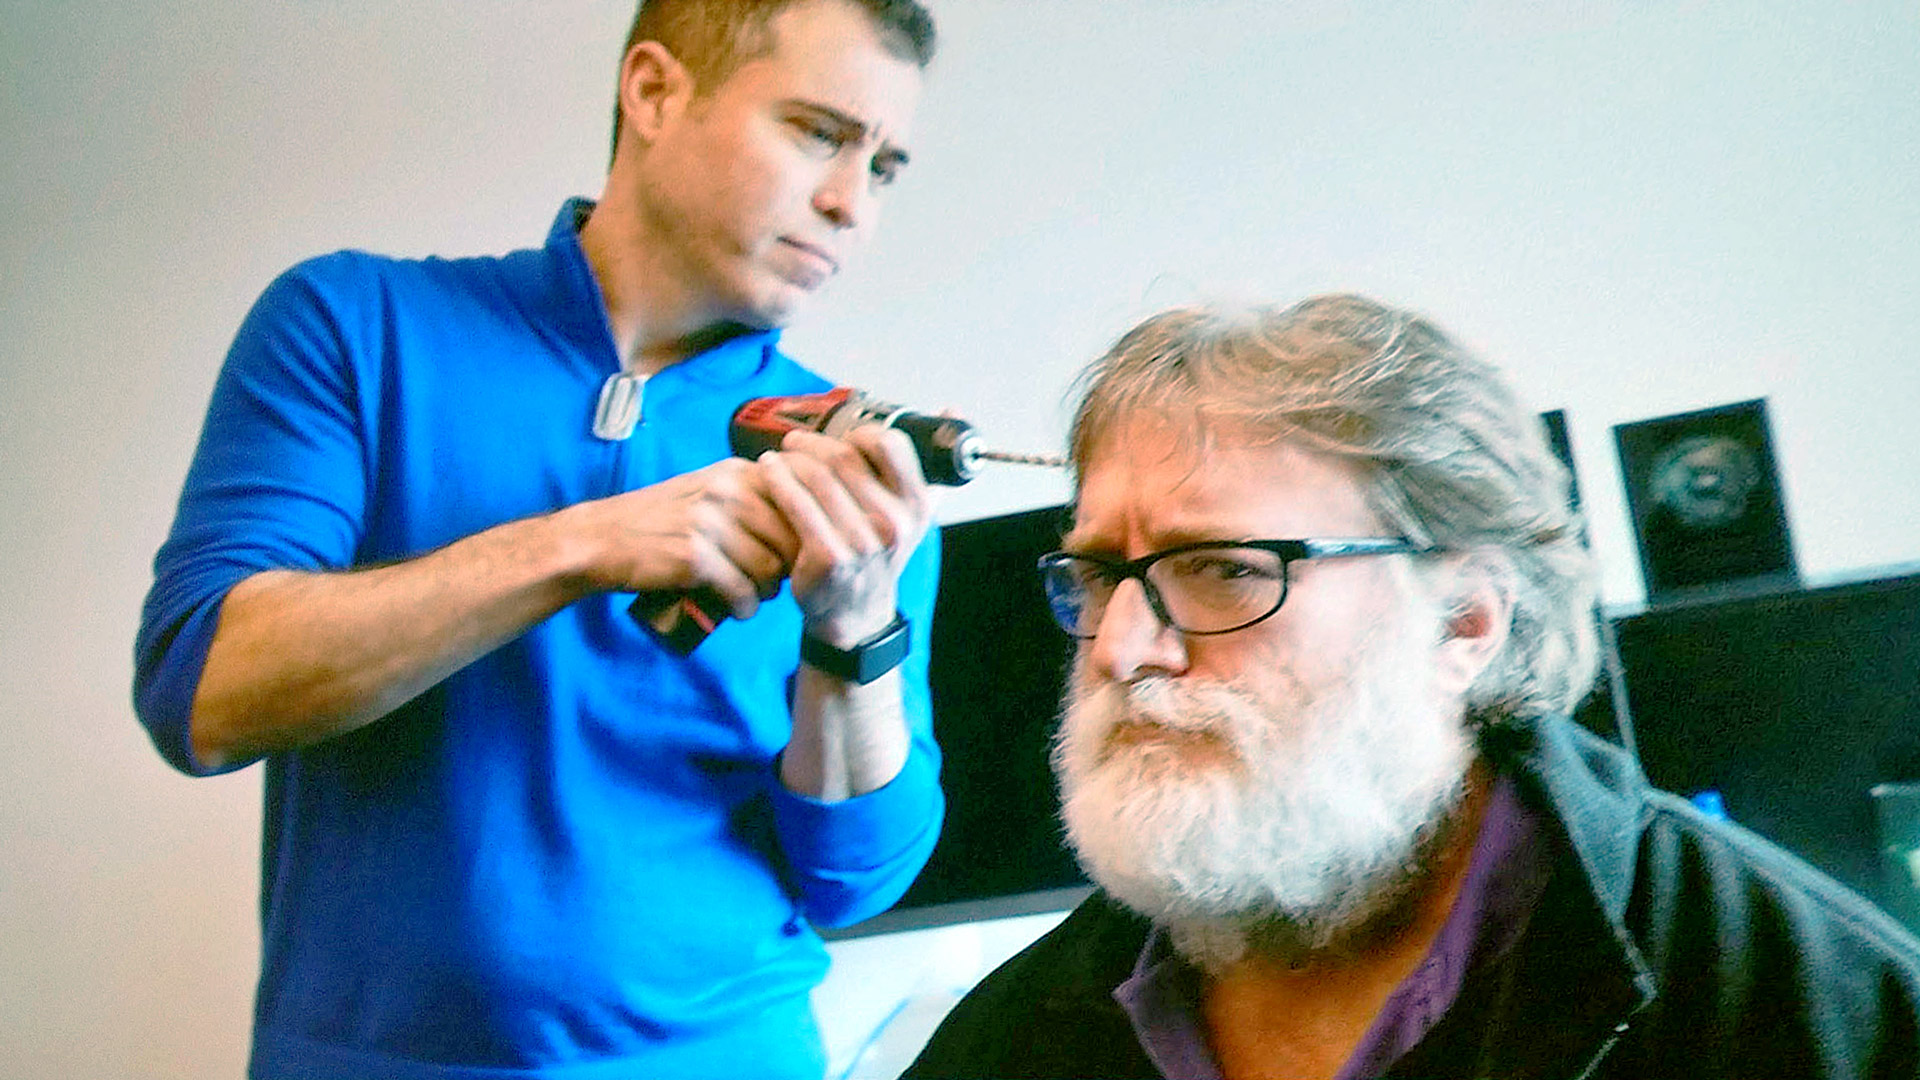 Gabe Newell on Brain-computer Interfaces: 'We're way closer to The Matrix  than people realize